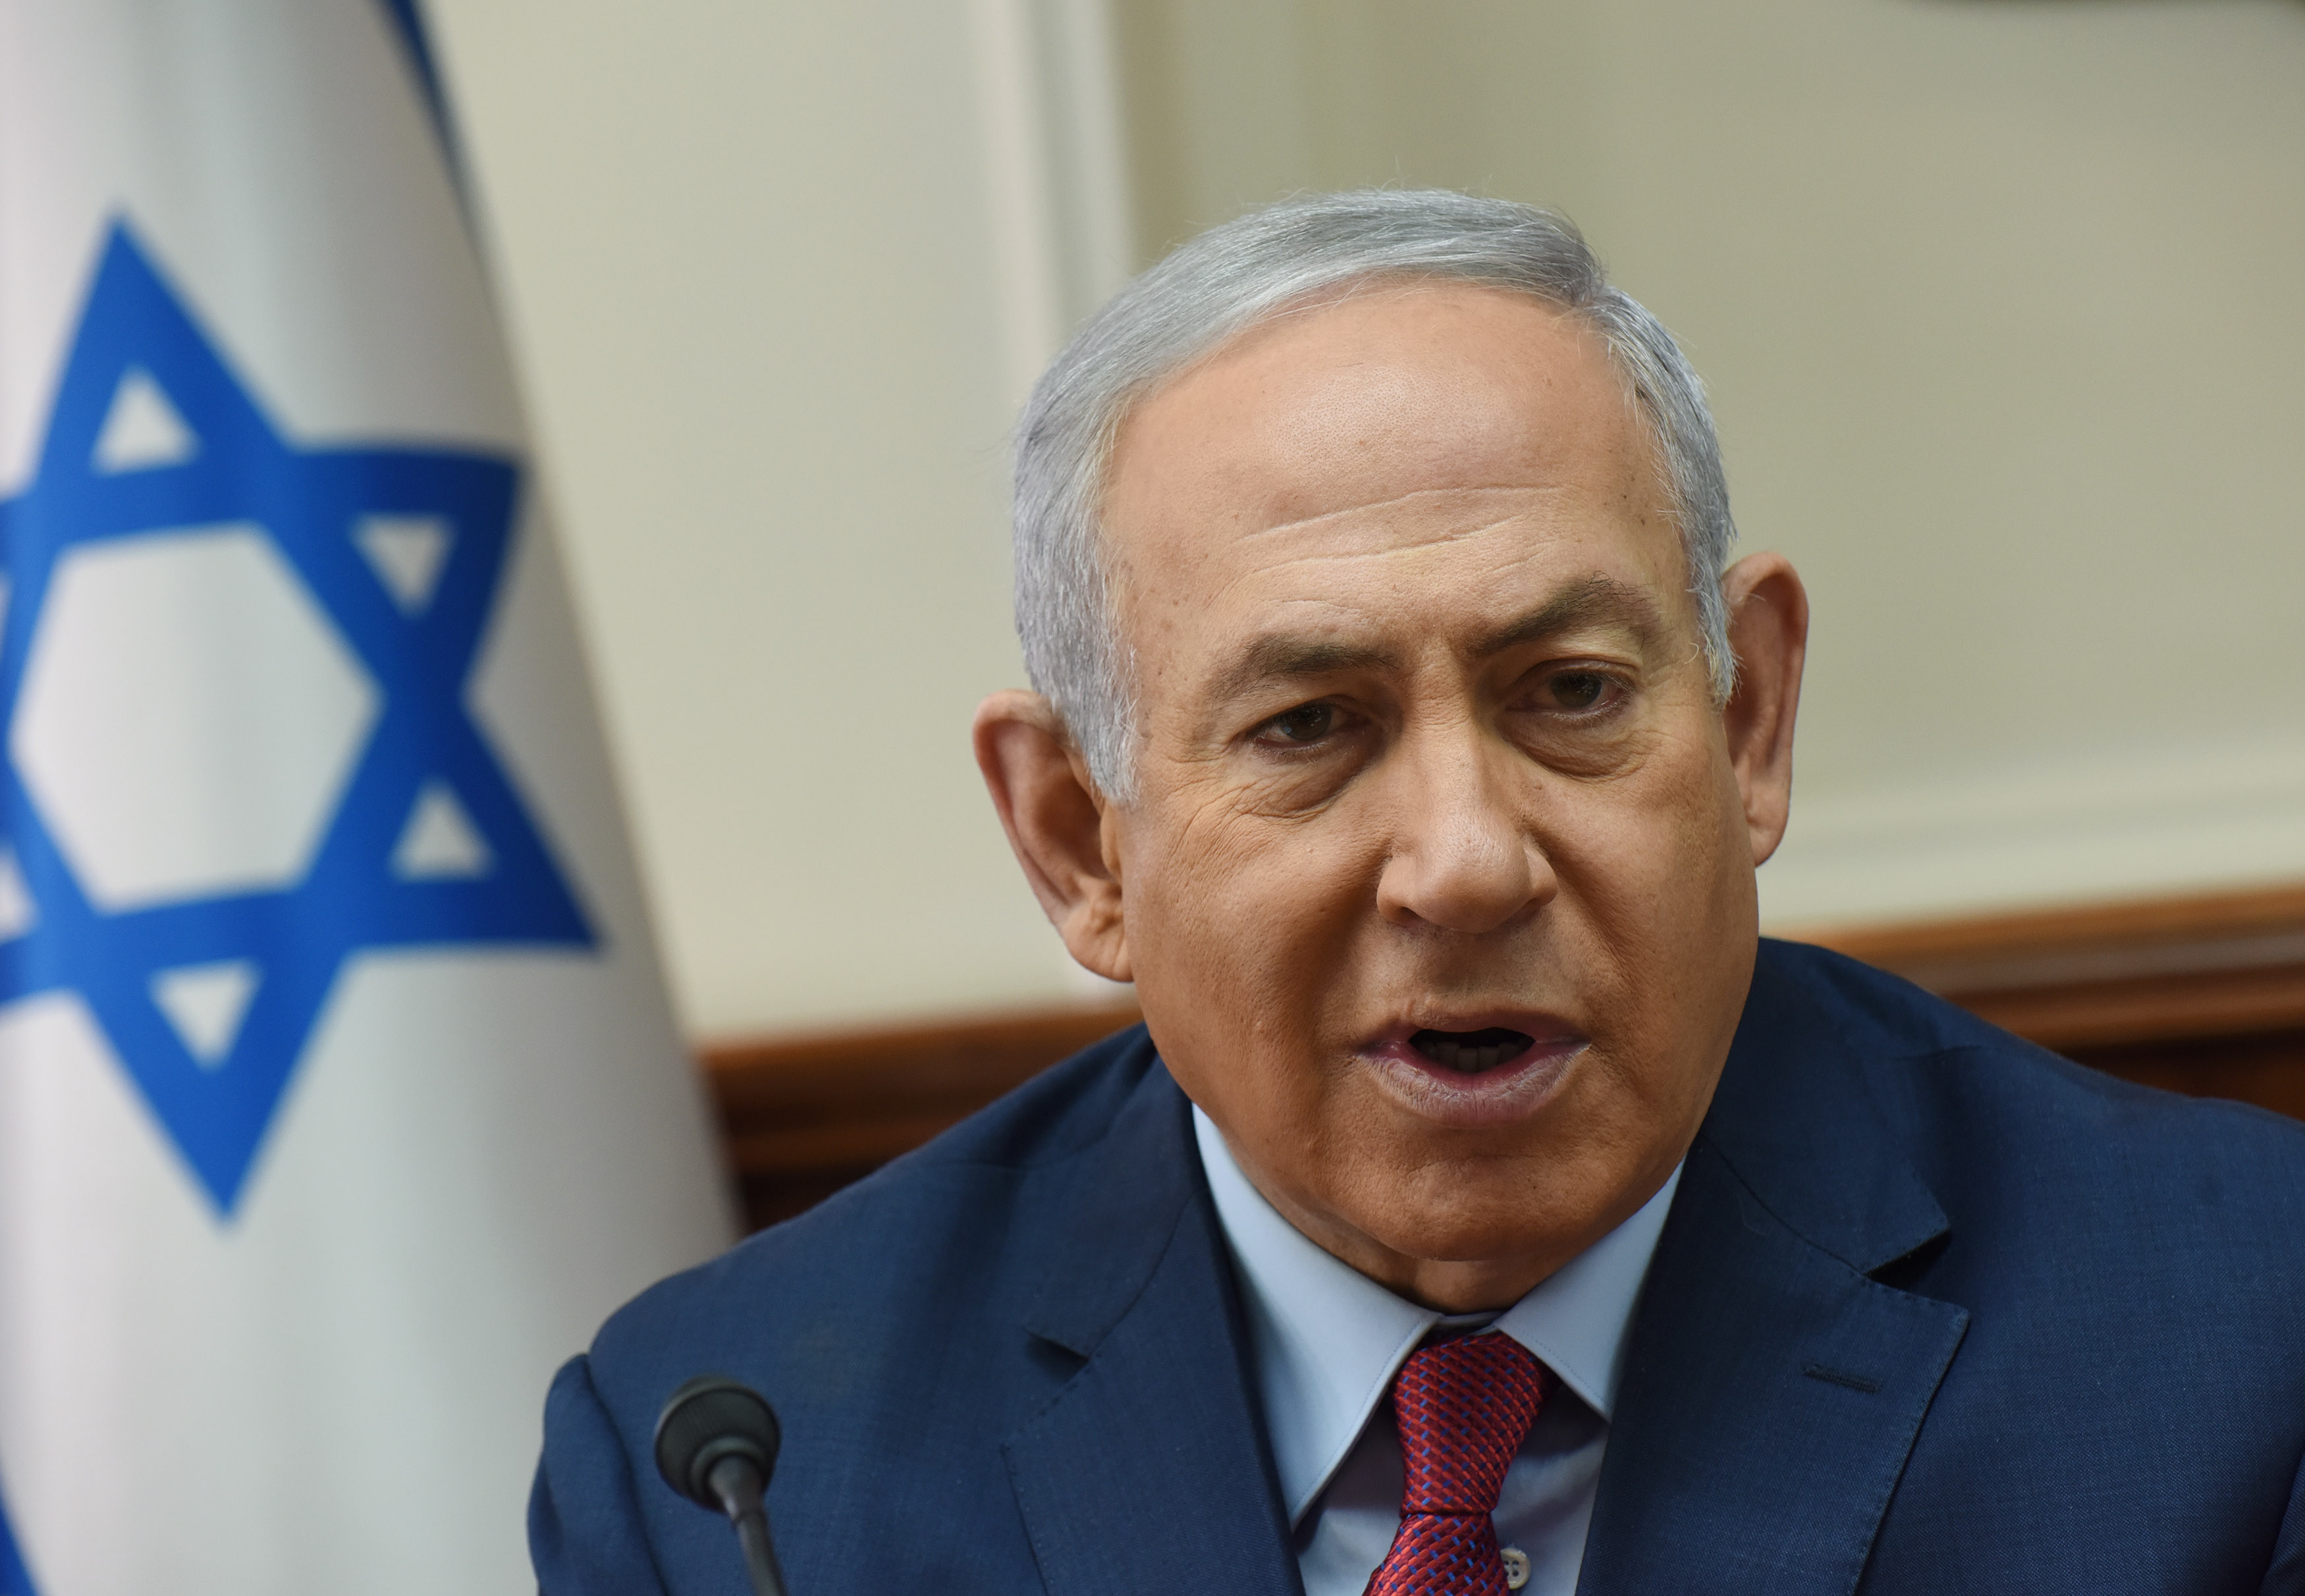 epa07209332 Israeli Prime Minister Benjamin Netanyahu chairs a meeting of the Ministerial Committee on Violence against Women, at the Prime Minister's office in Jerusalem, 05 December 2018.  EPA/DEBBIE HILL / POOL